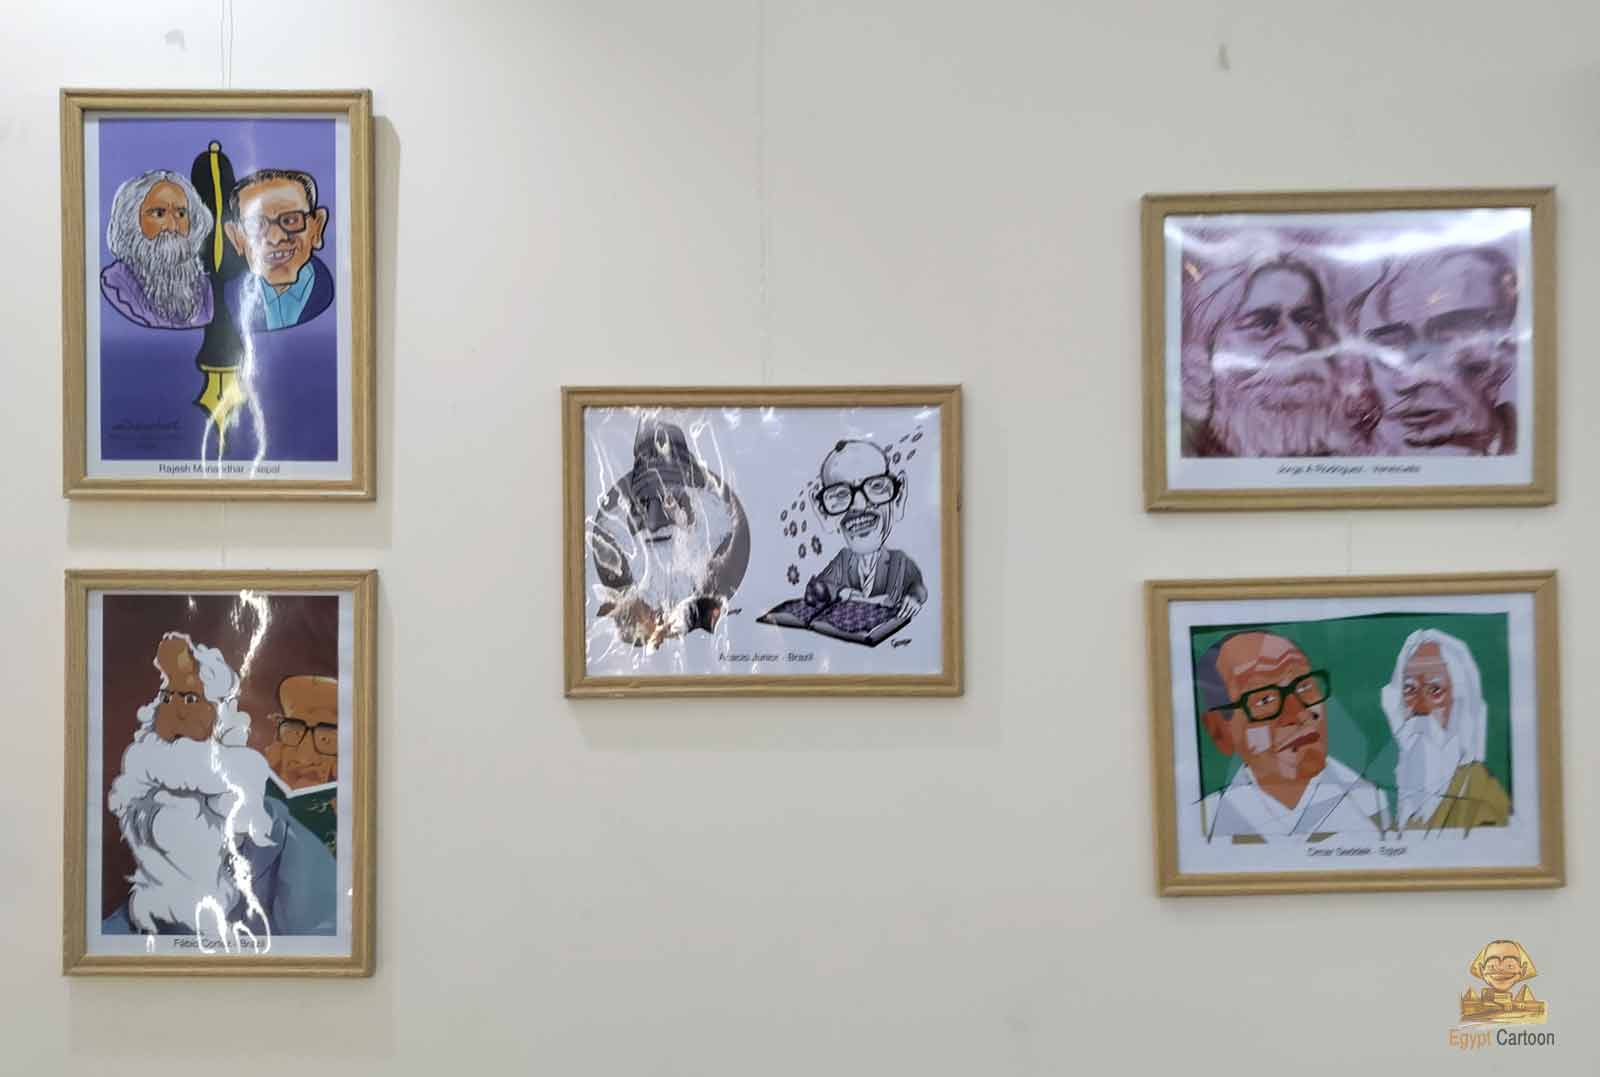 Photos from Inauguration of the International Caricature Exhibition on "Tagore and Mahfouz"